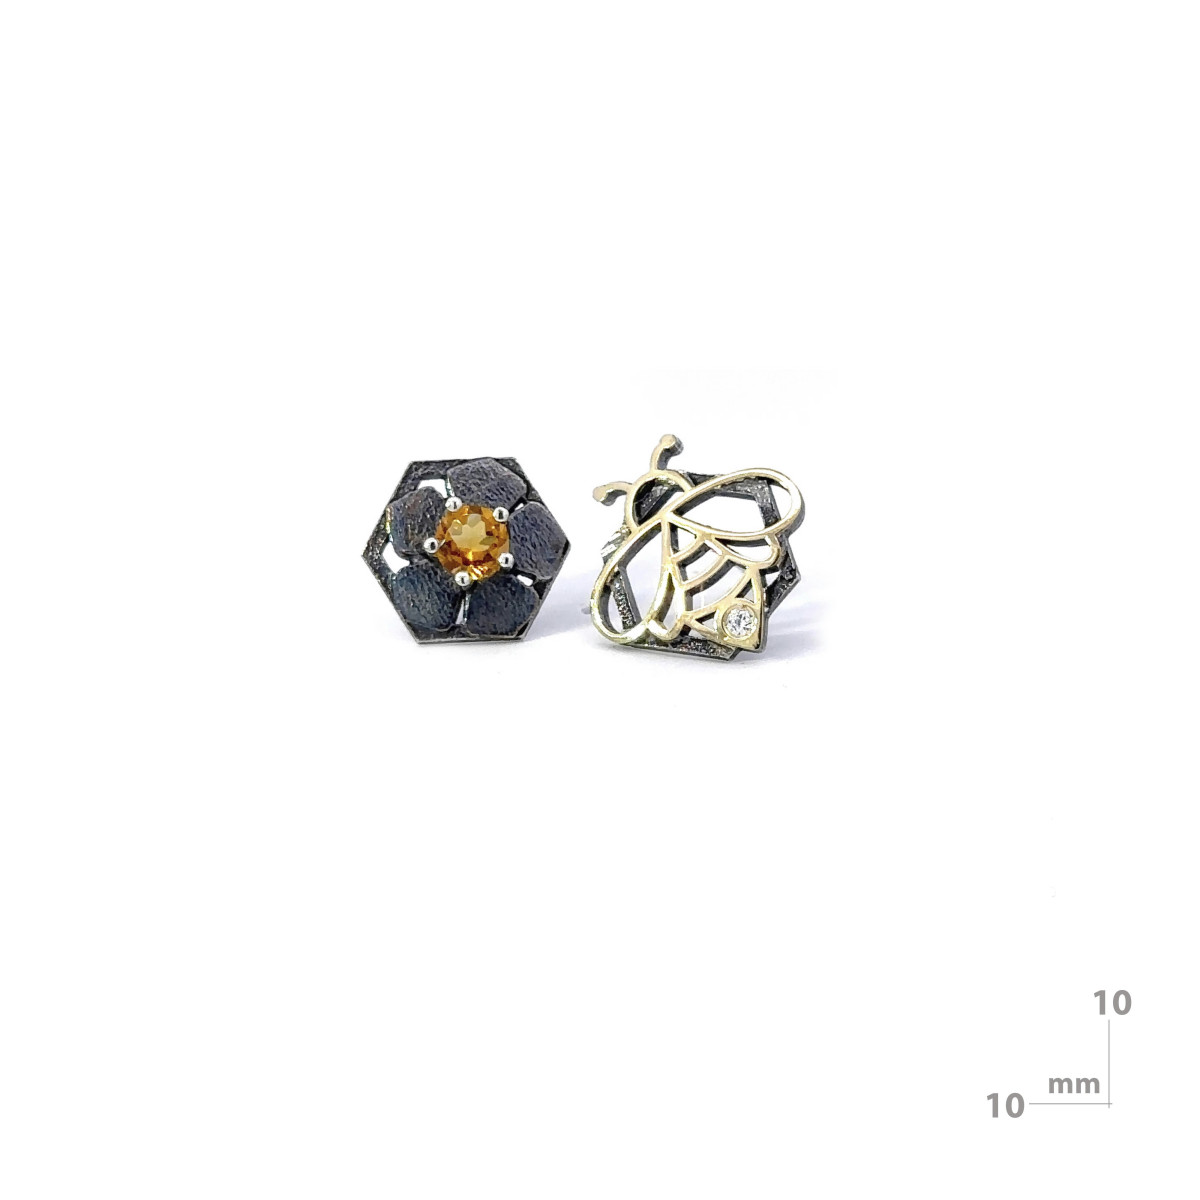 Silver, gold, brilliant and citrine earrings